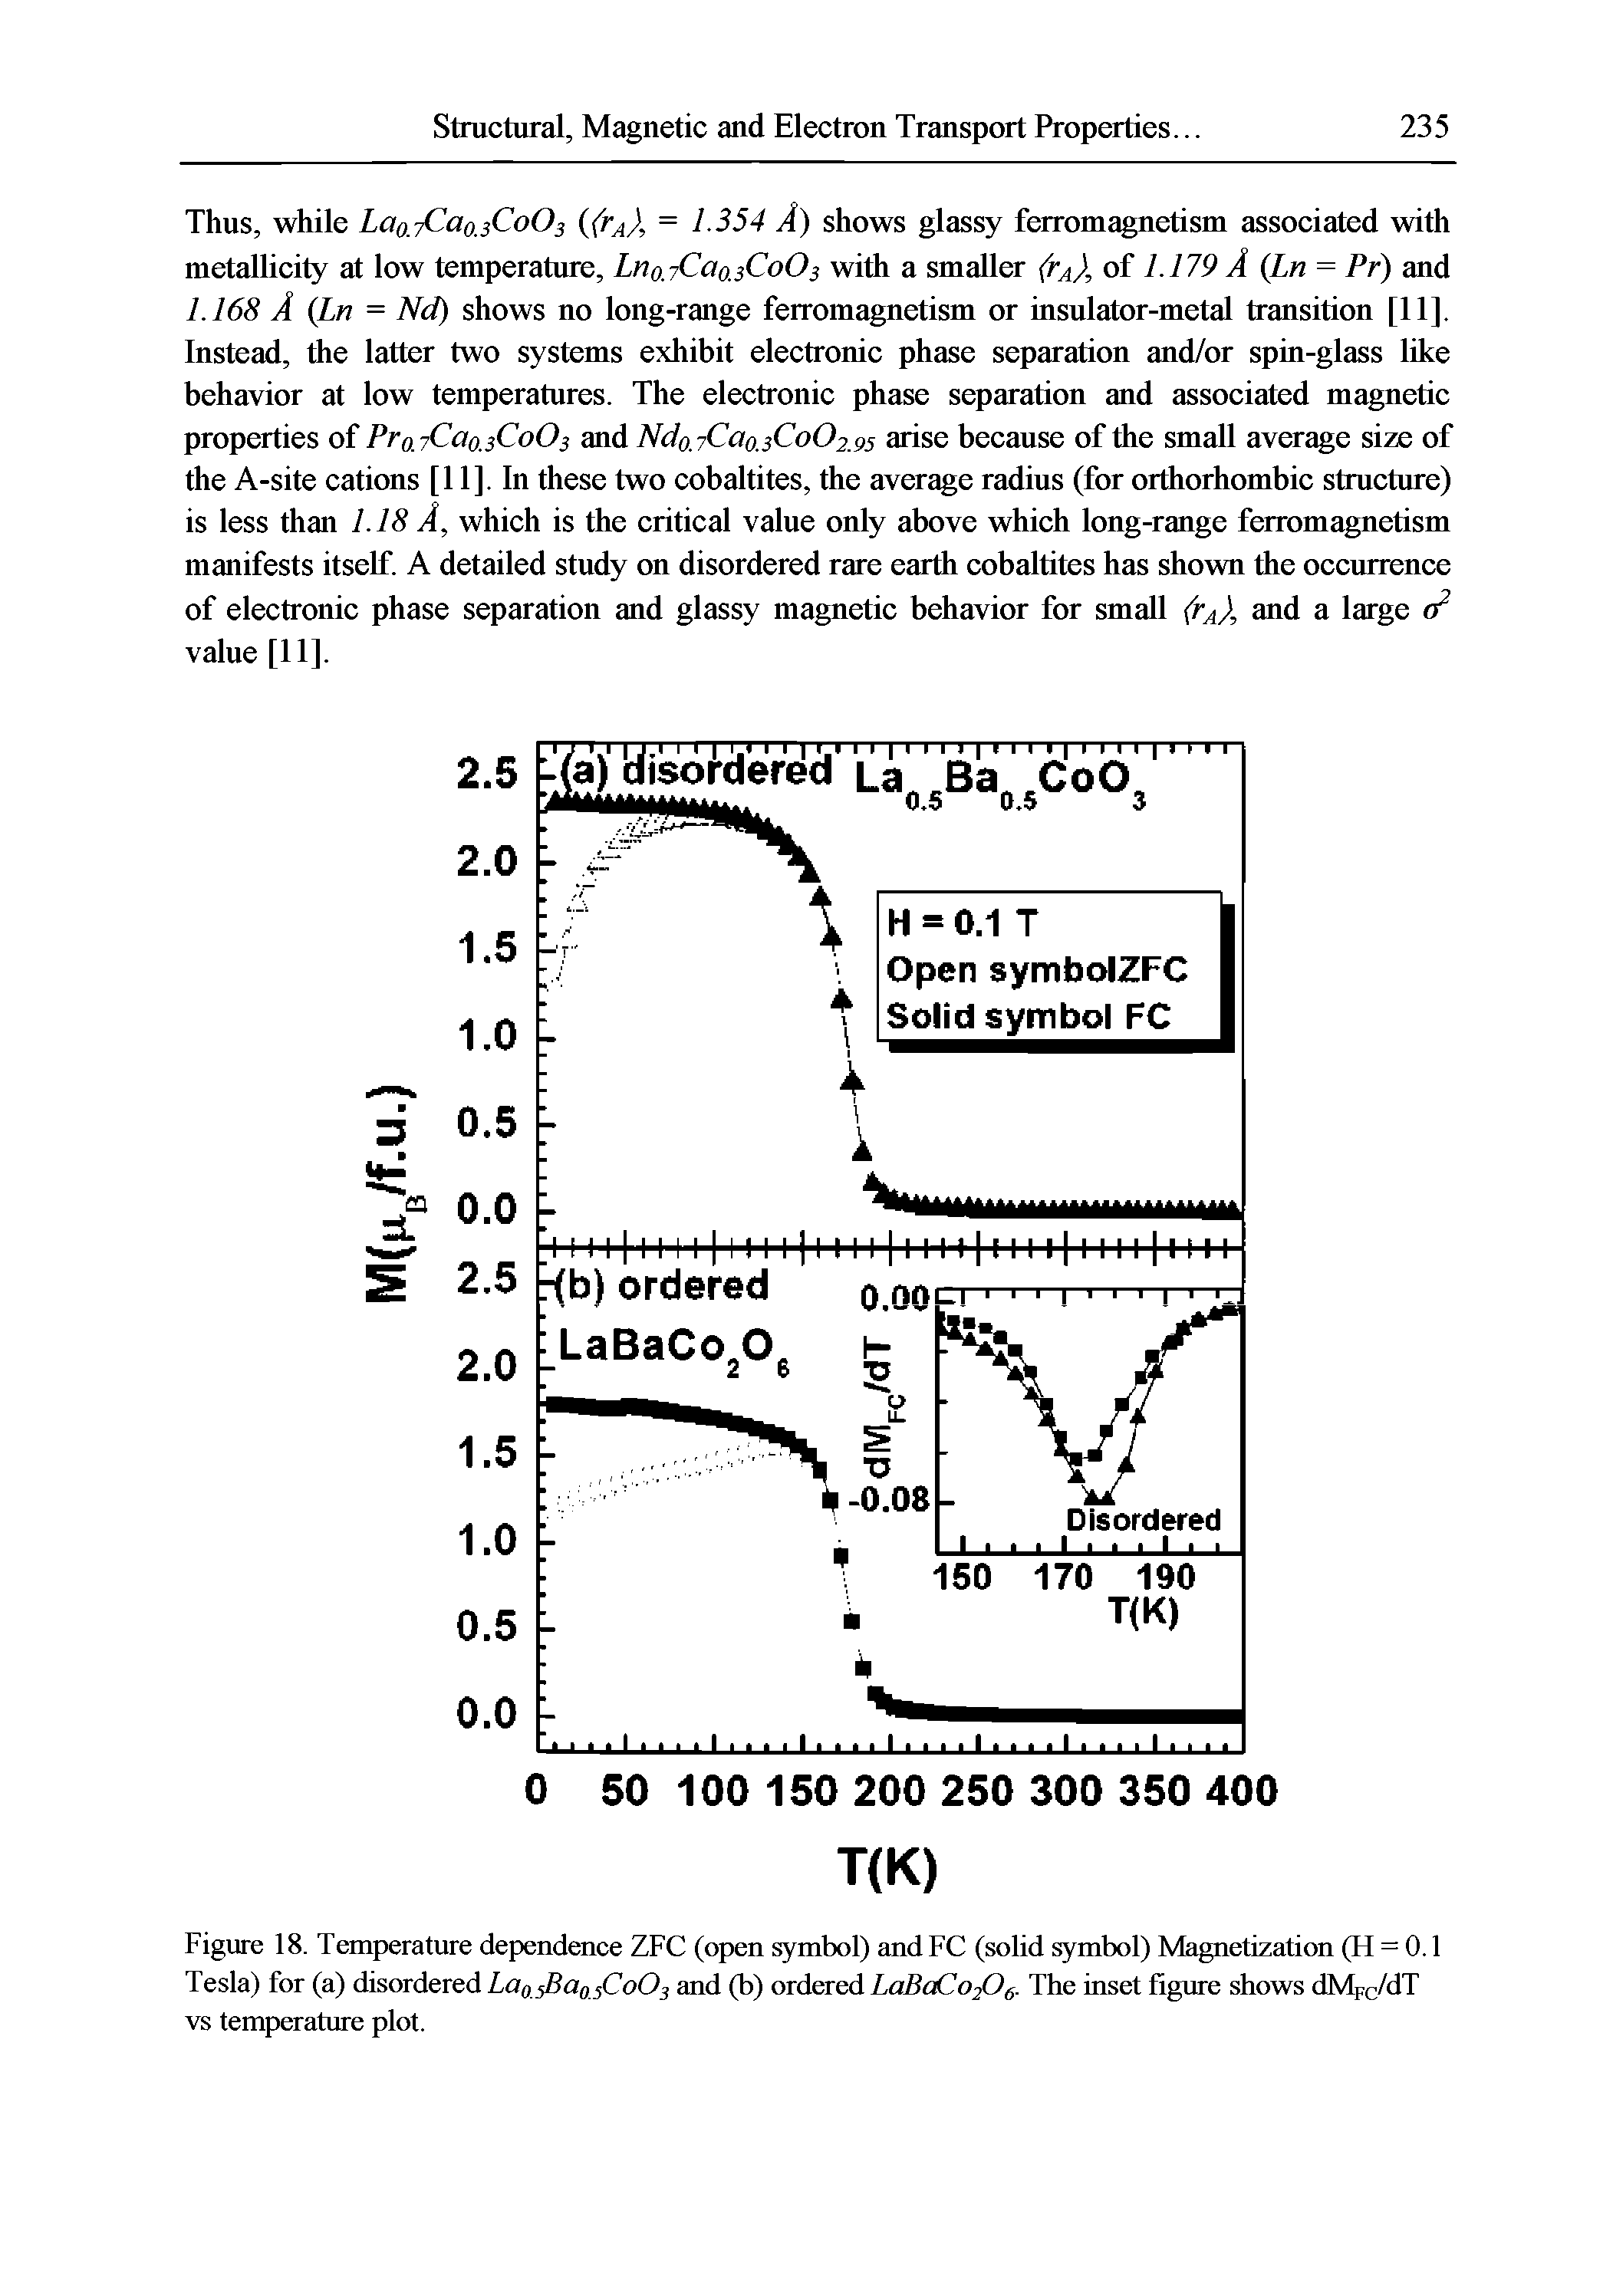 Figure 18. Temperature dependence ZFC (open symbol) and FC (solid symbol) Magnetization (H = 0.1 Tesla) for (a) disordered Lao sBaojCoO and (b) ordered The inset figure shows dMpc/dT...